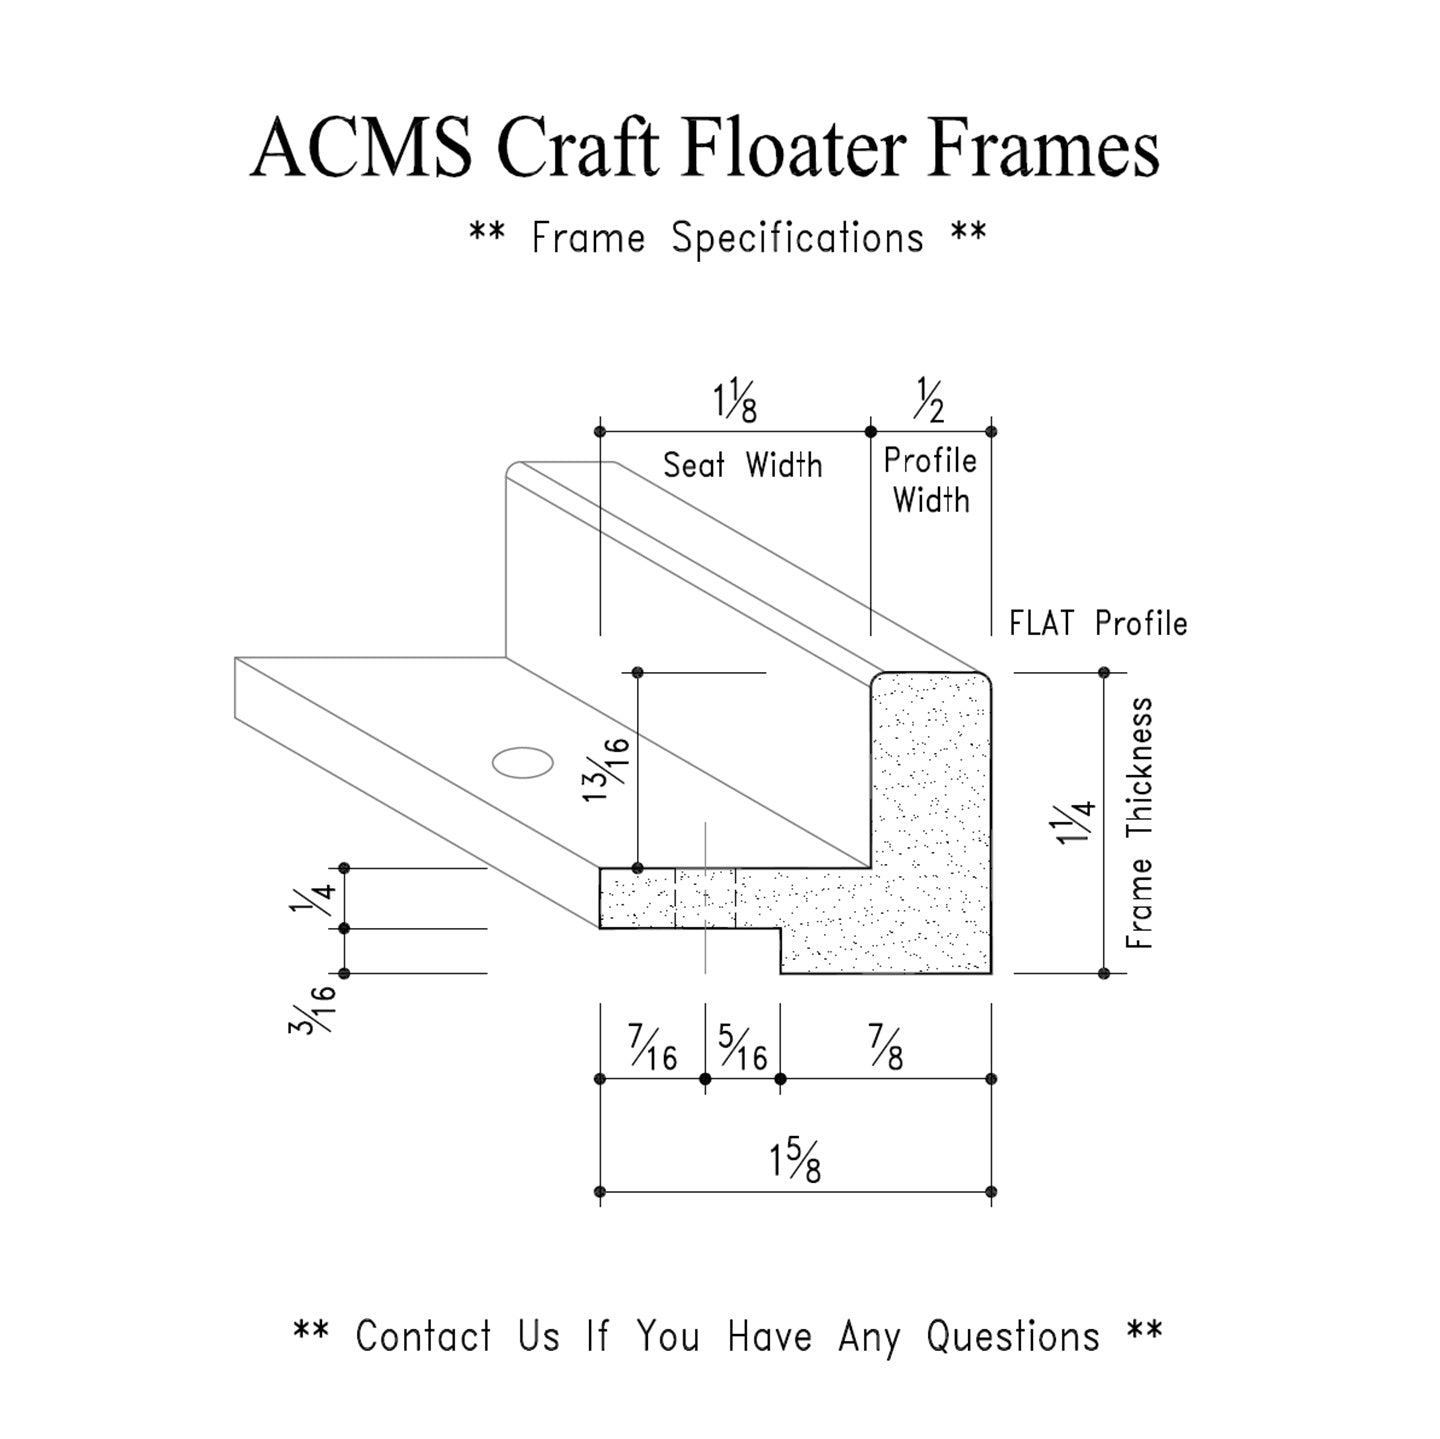 ACMS Hexagon Craft Floater Frame - For 3/4" Thick Artwork - Profile 1" FLAT - 1 1/4" Thick Frame